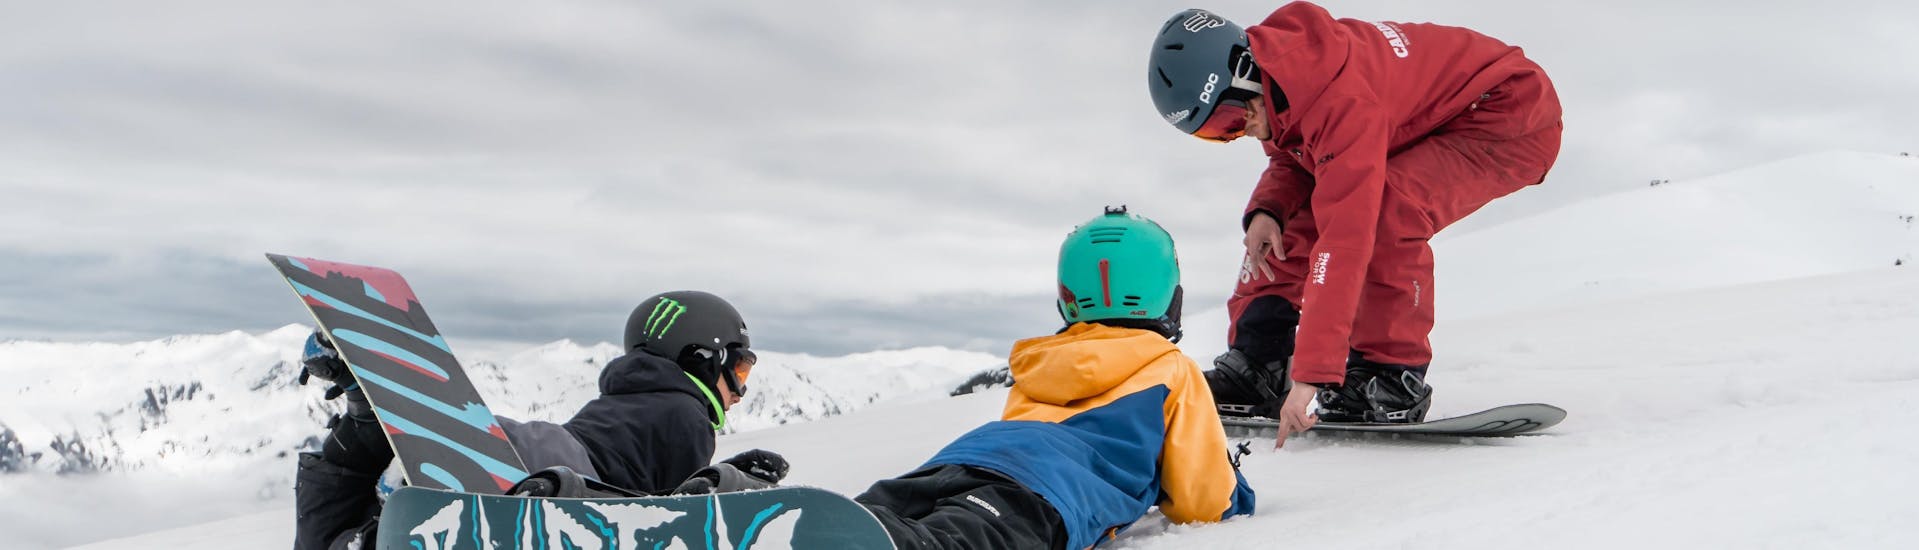 Snowboarding Lessons (7-17 years) - First Timer Package.